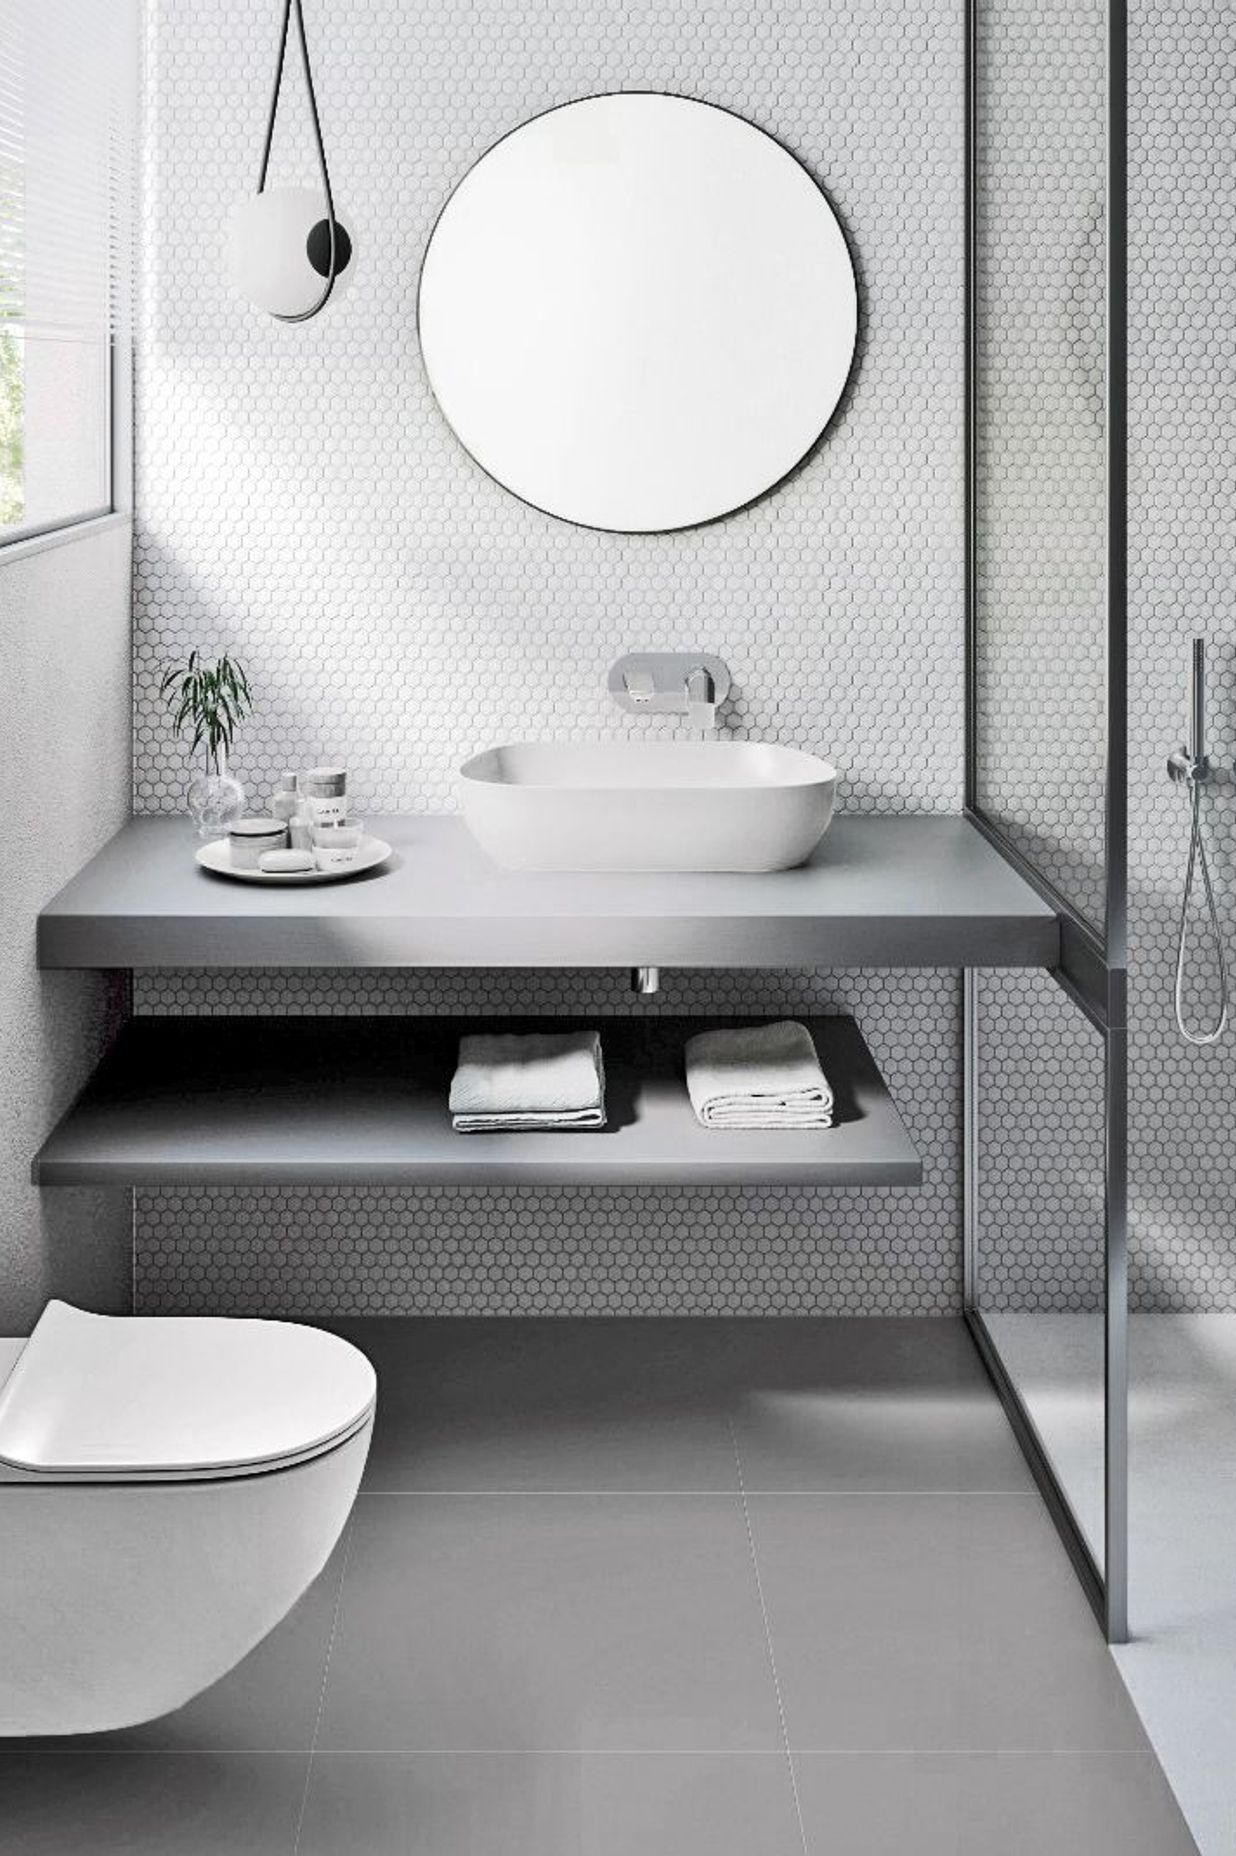 Ideas and Inspiration for a Sustainable Bathroom